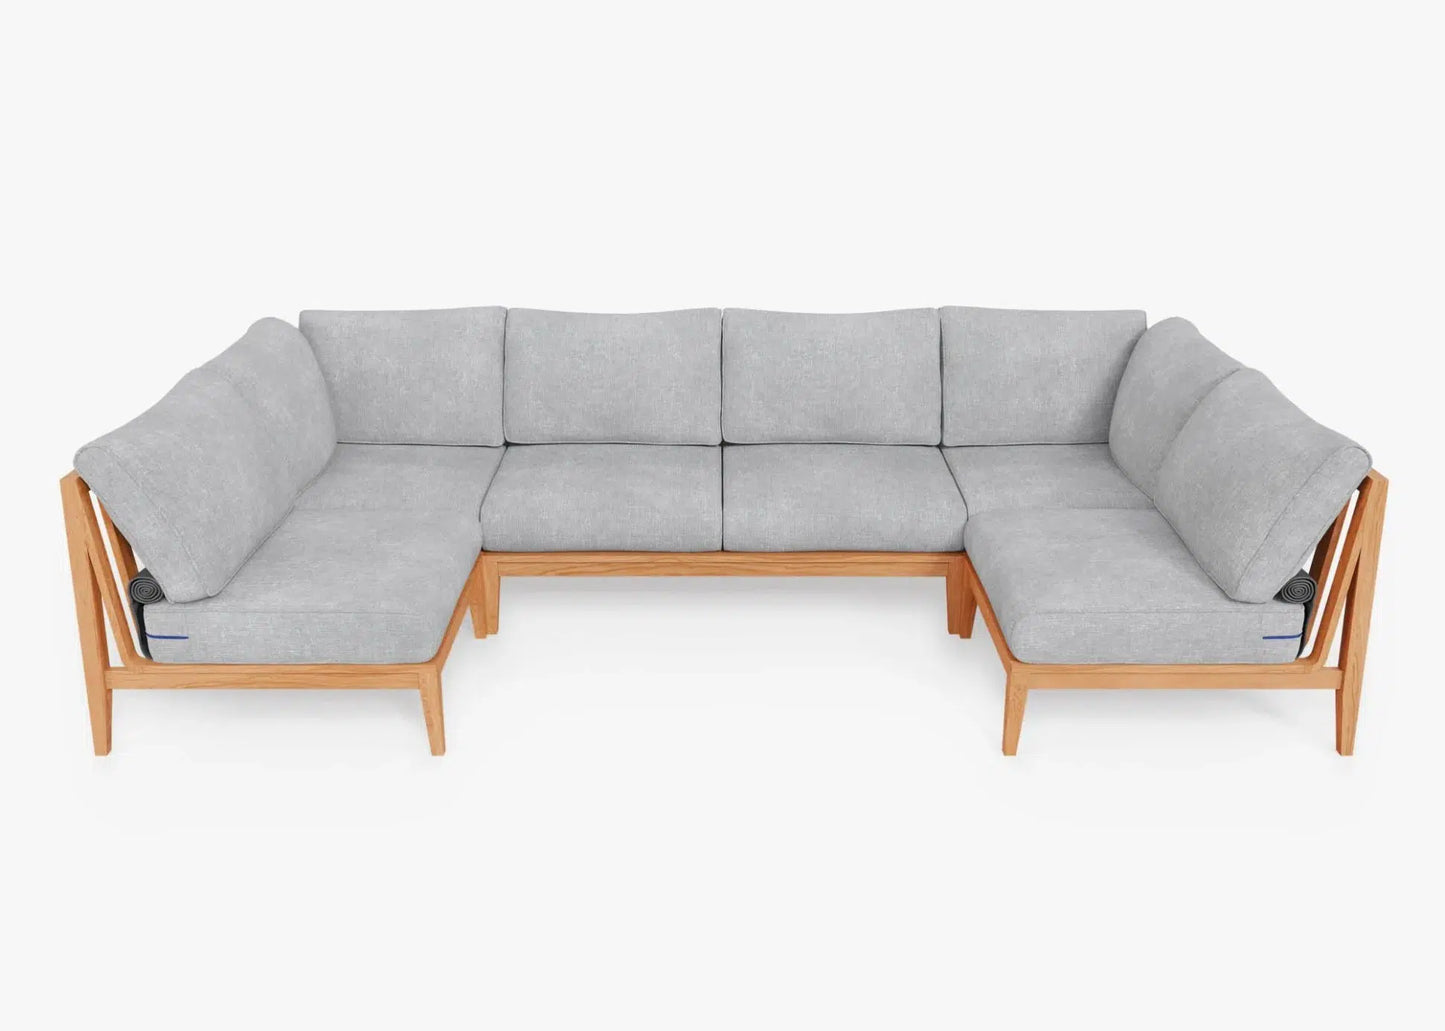 Live Outer 127" x 64" Teak Outdoor U Shape Sectional 6-Seat With Pacific Fog Gray Cushion